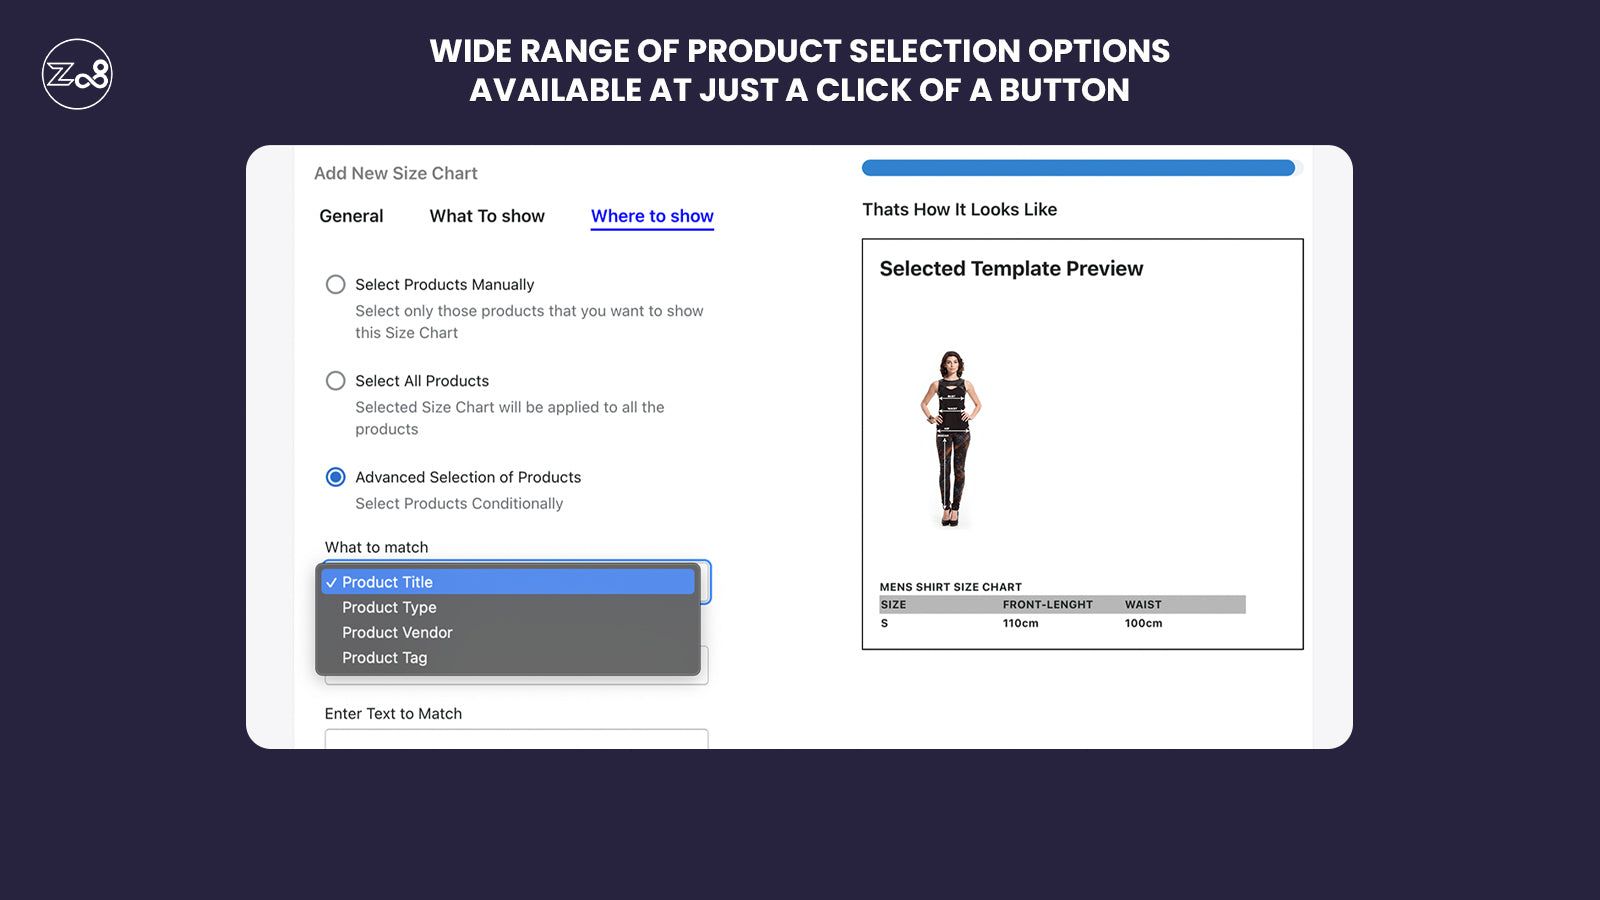 Z08 Size chart app - Widest range of product selection options